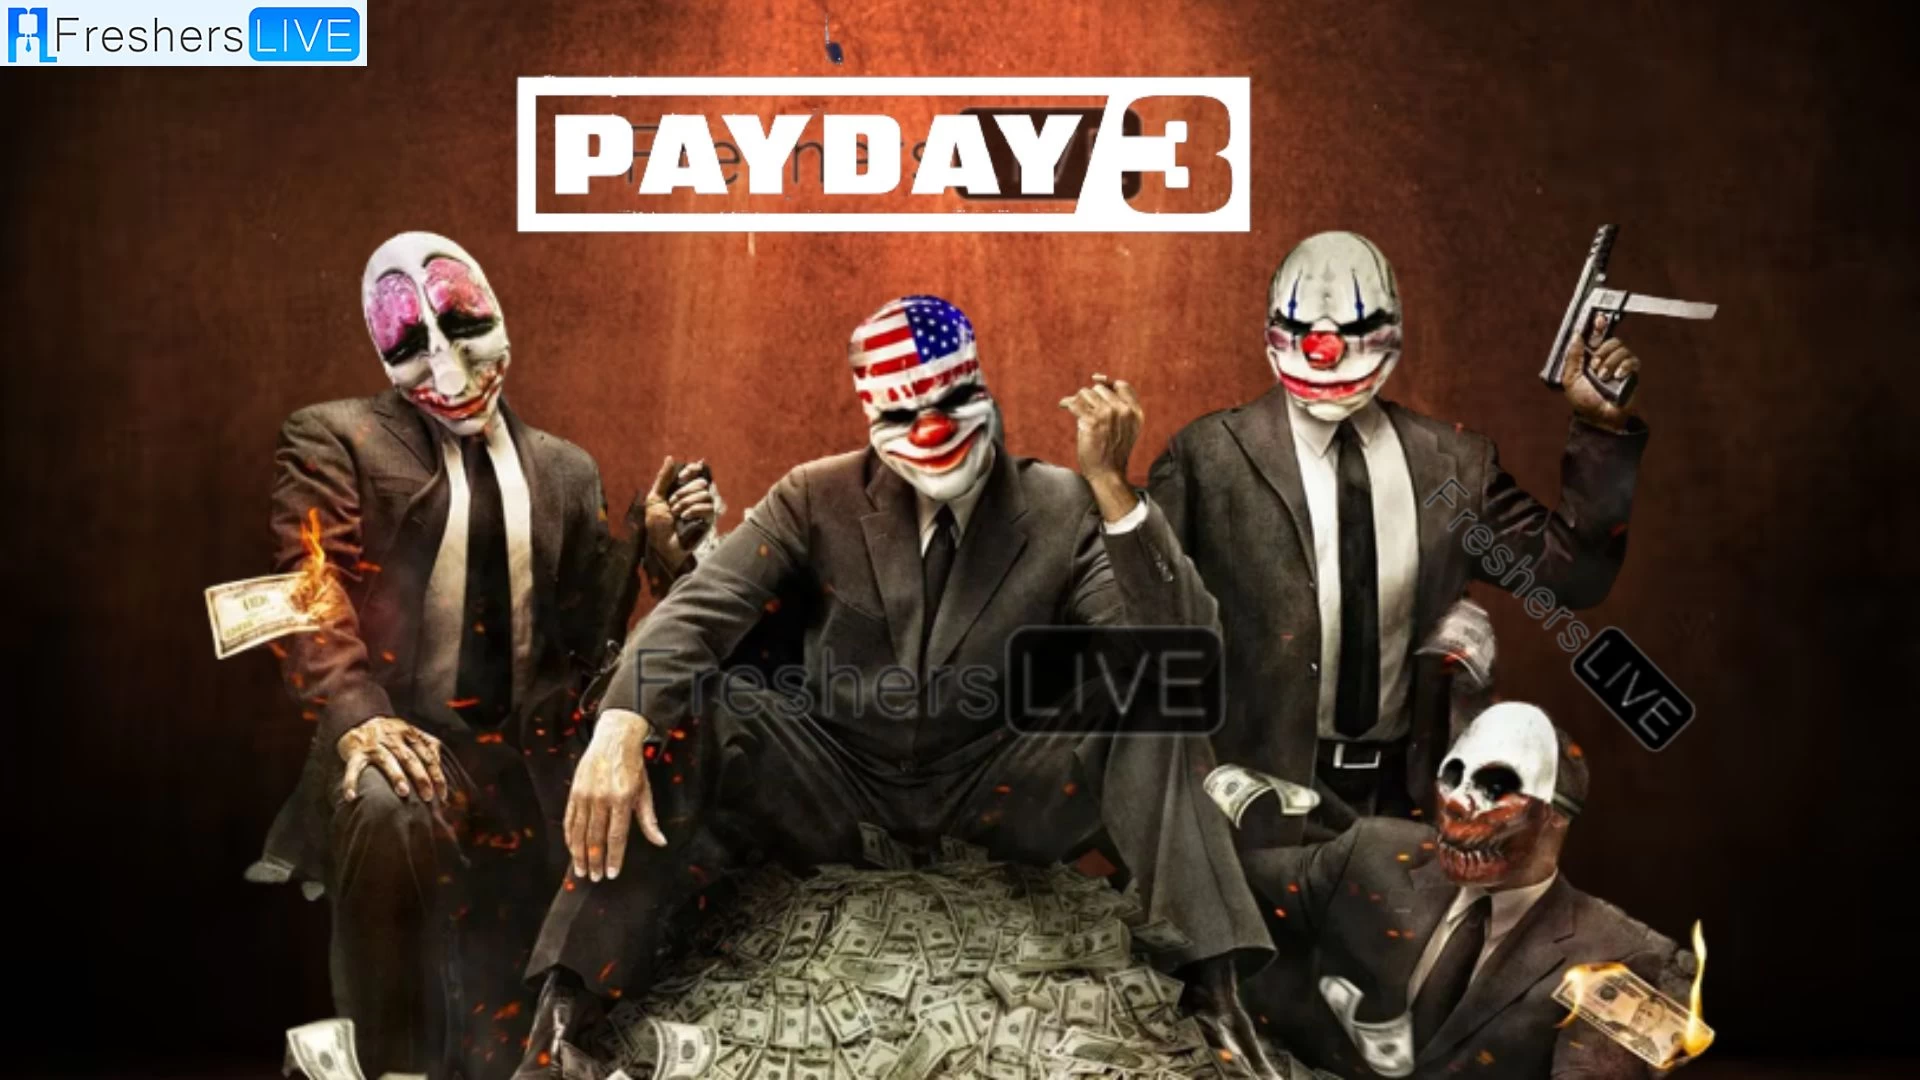 Payday 3 How to Grab An Executive? Payday 3 Gameplay and Trailer